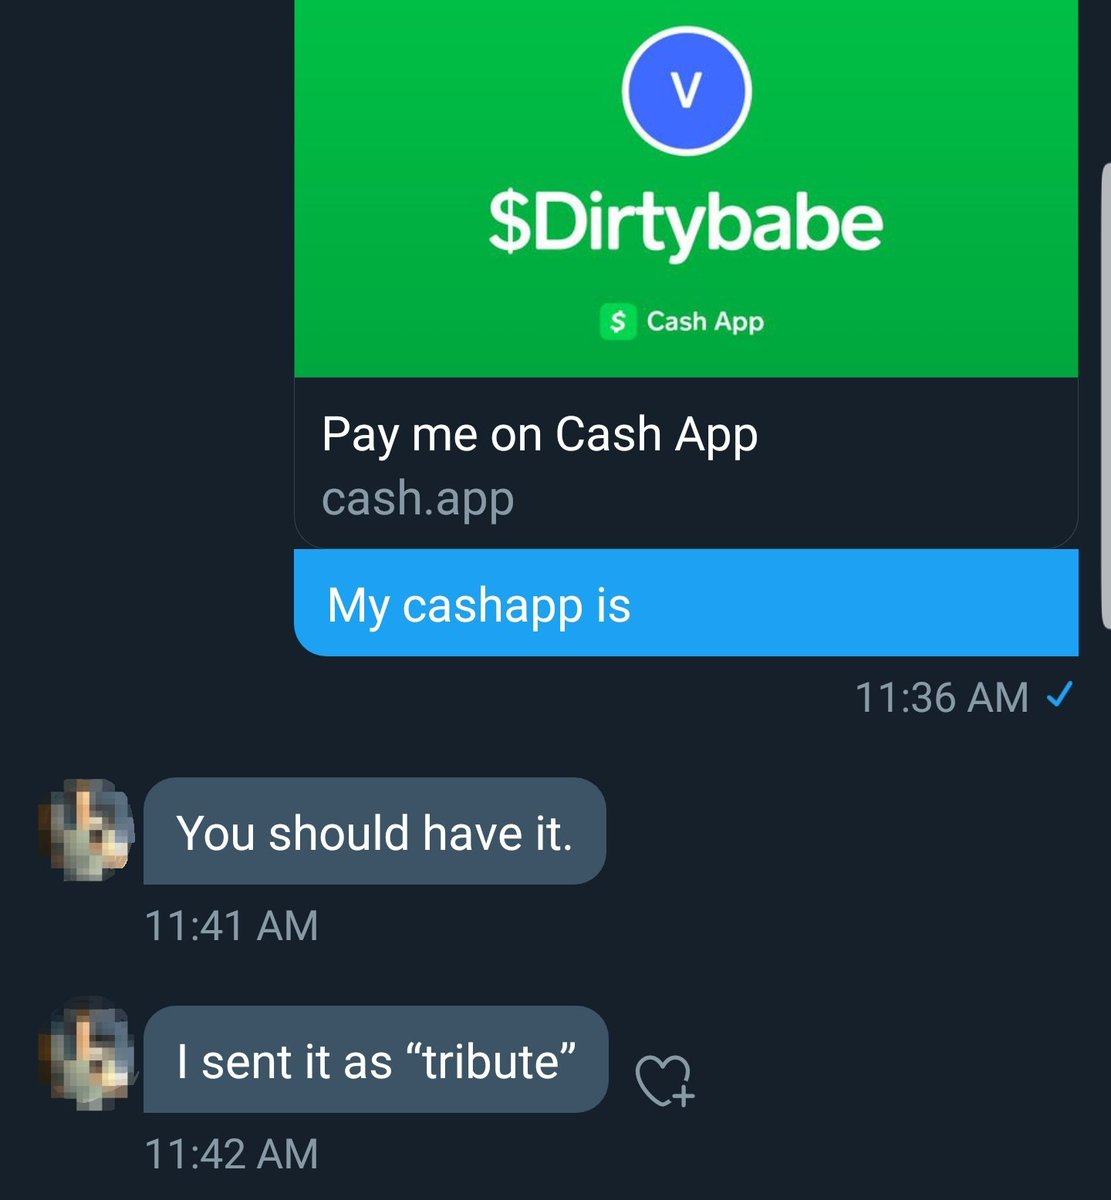 When they know you should have everything you want 💖 Cash.app/$dirtybabe 

{ findom findomme payme payandplay femdom }